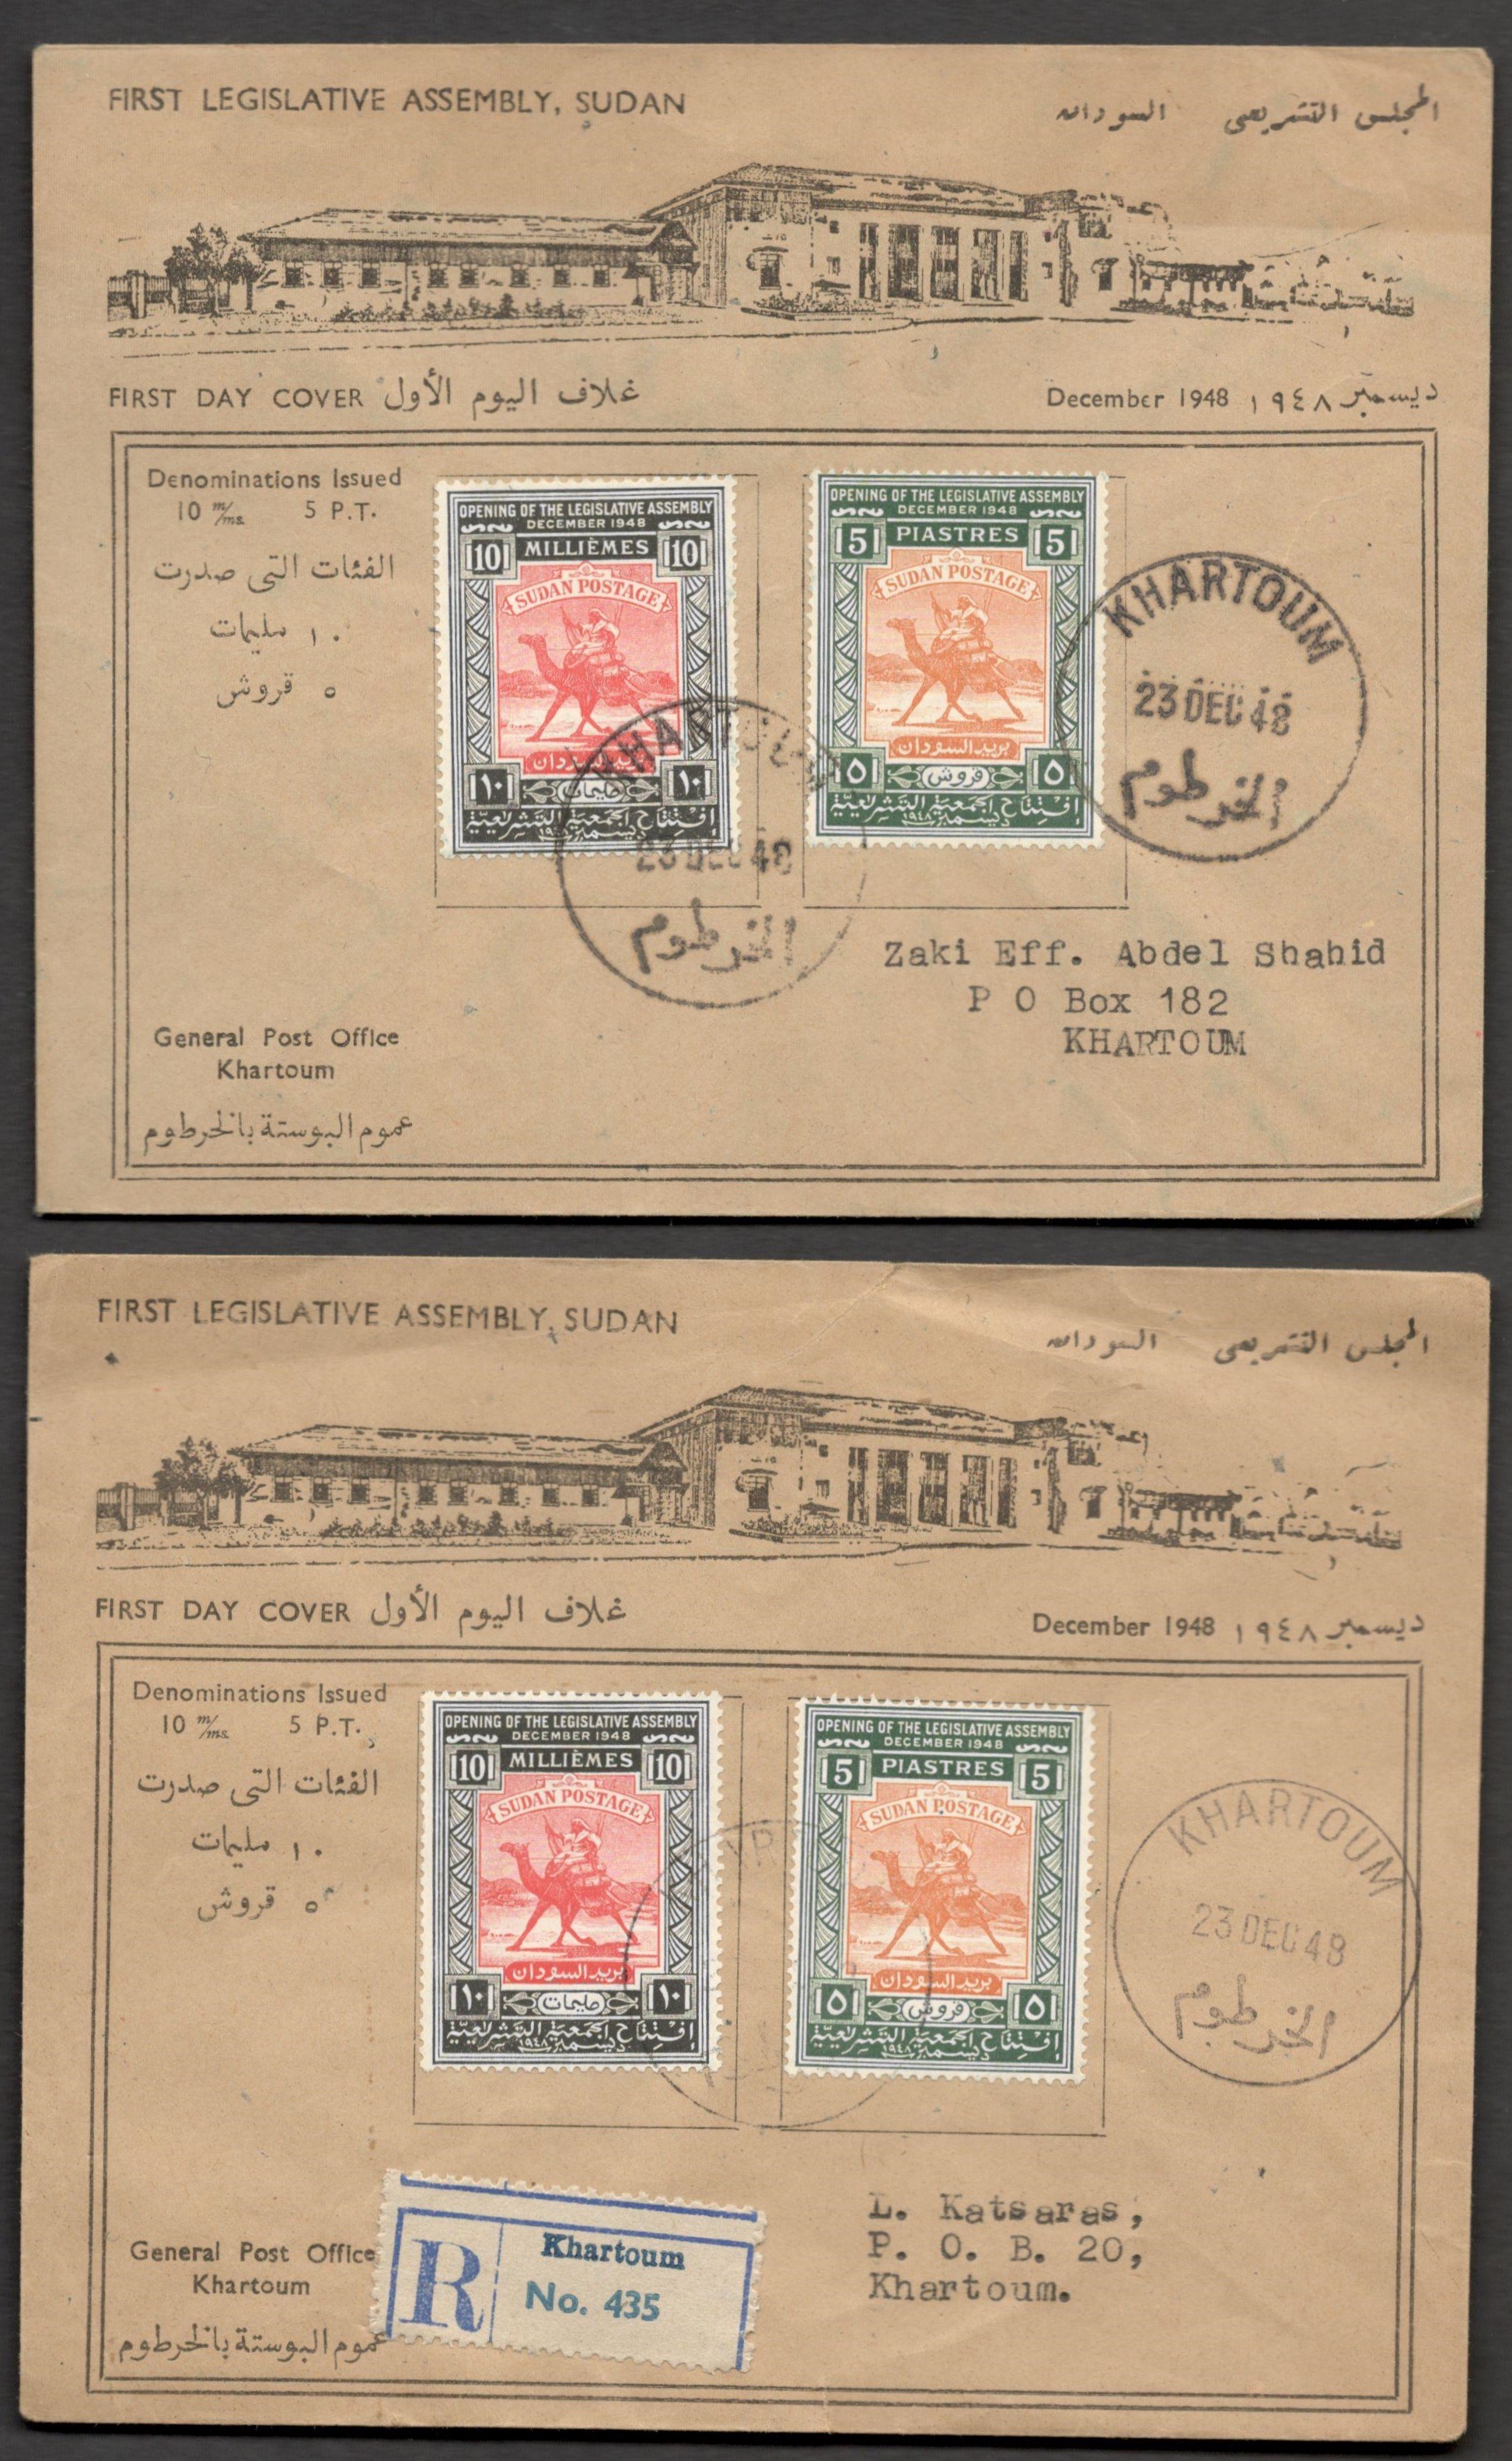 FIVE SUDAN FIRST DAY COVERS - 1954 - Image 3 of 3